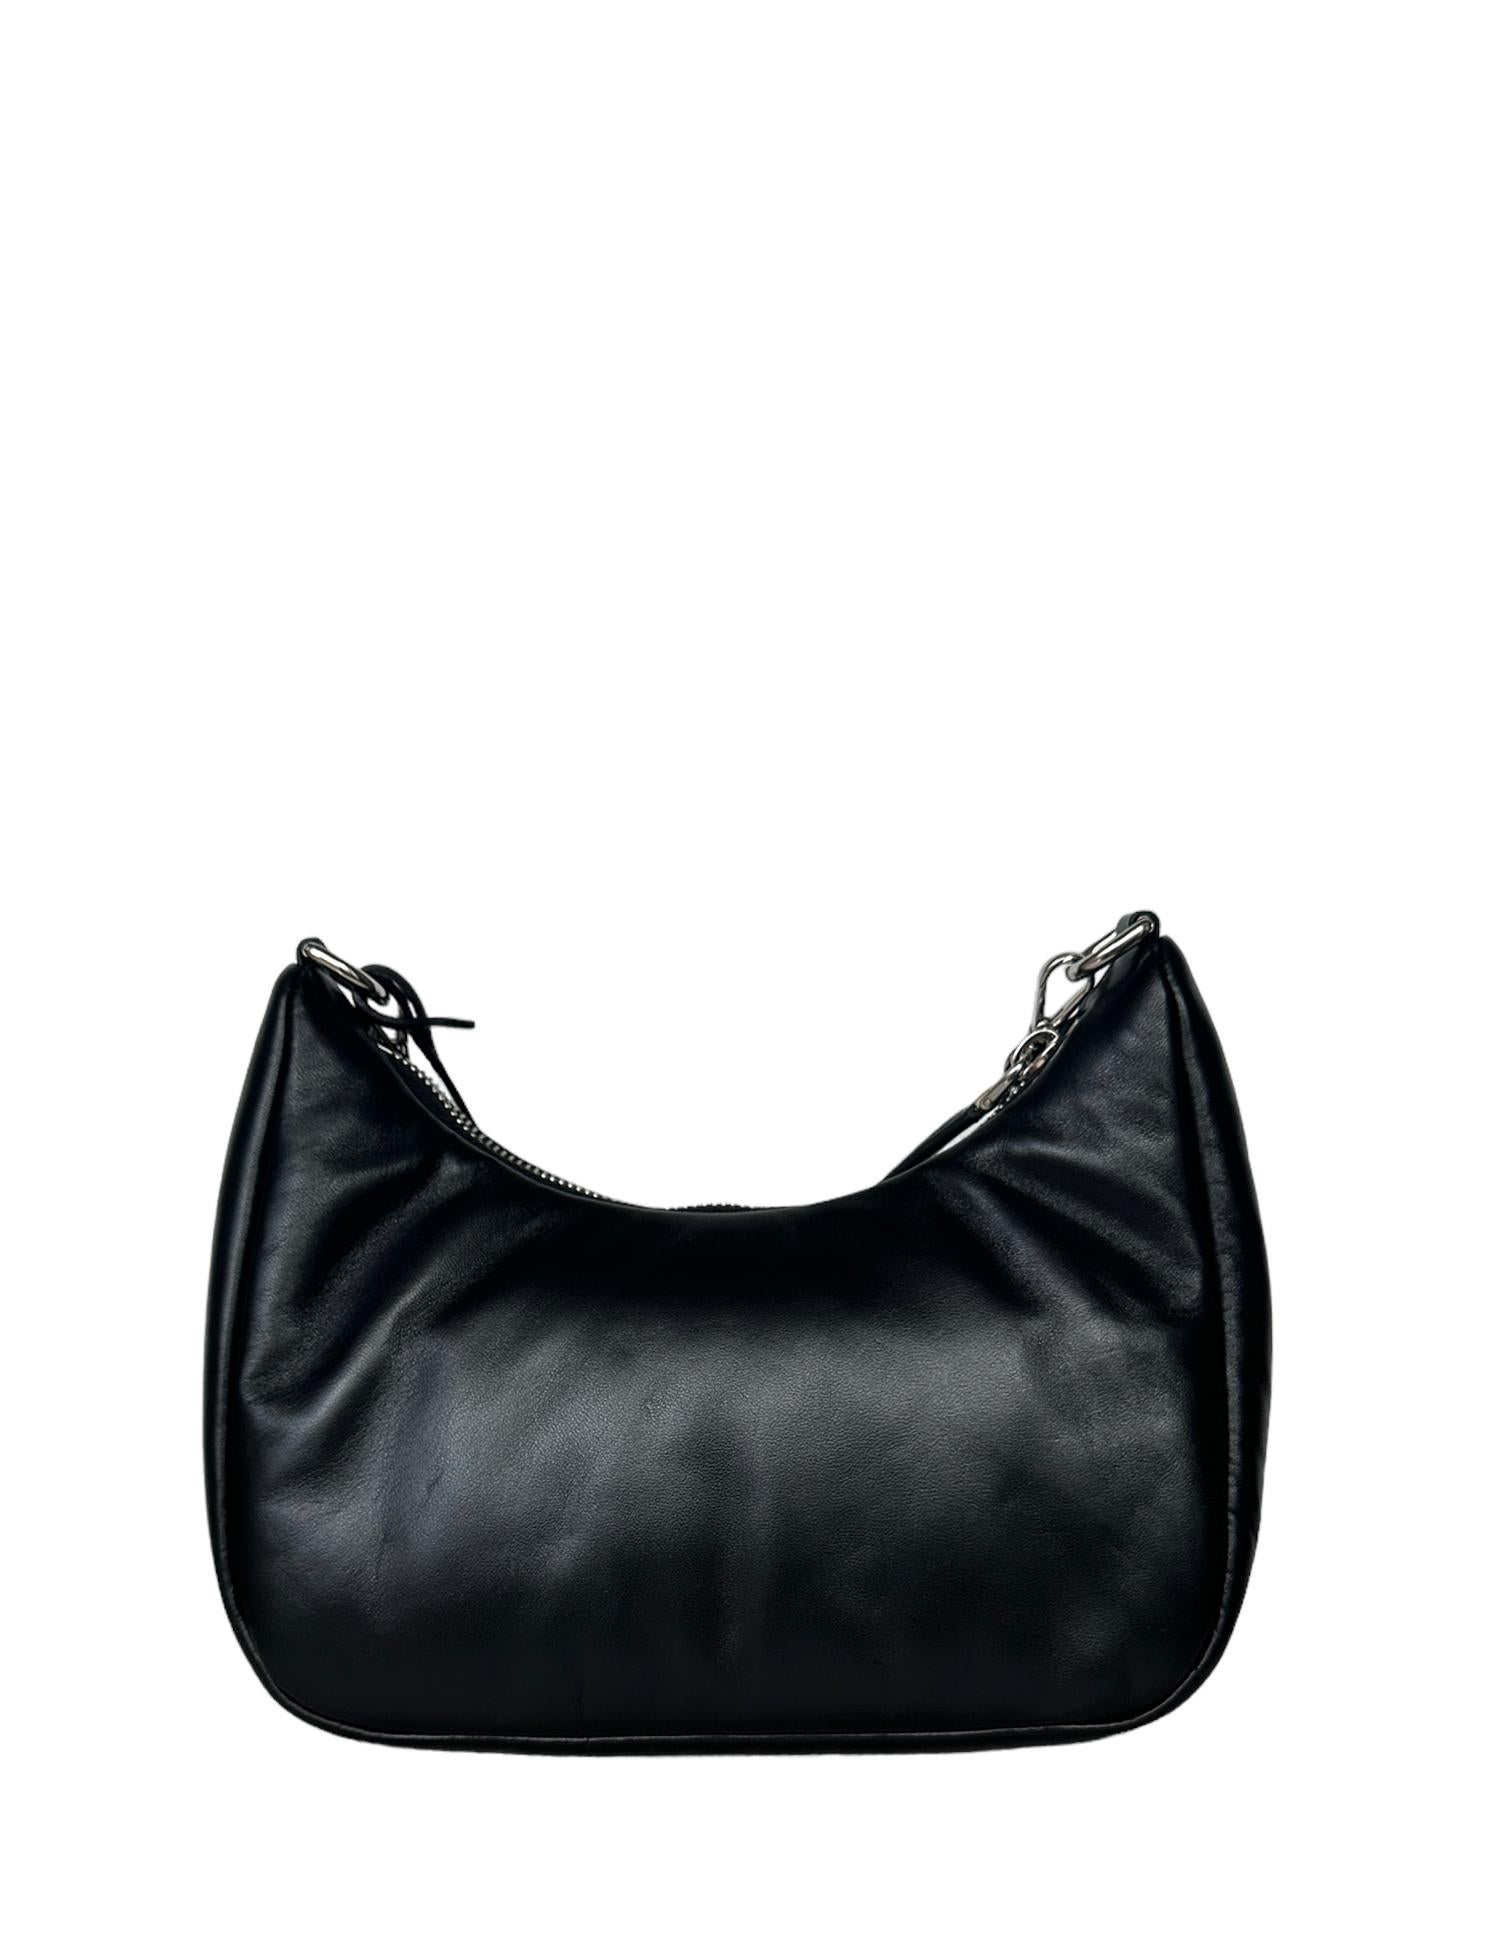 Prada Black Padded Nappa-Leather Re-Edition 2005 Shoulder Bag

Made In: Italy
Year of Production: 2022
Color: Black
Hardware: Silvertone
Materials: Nappa leather and canvas
Lining: Black smooth leather
Exterior Pockets: None
Interior Pockets: